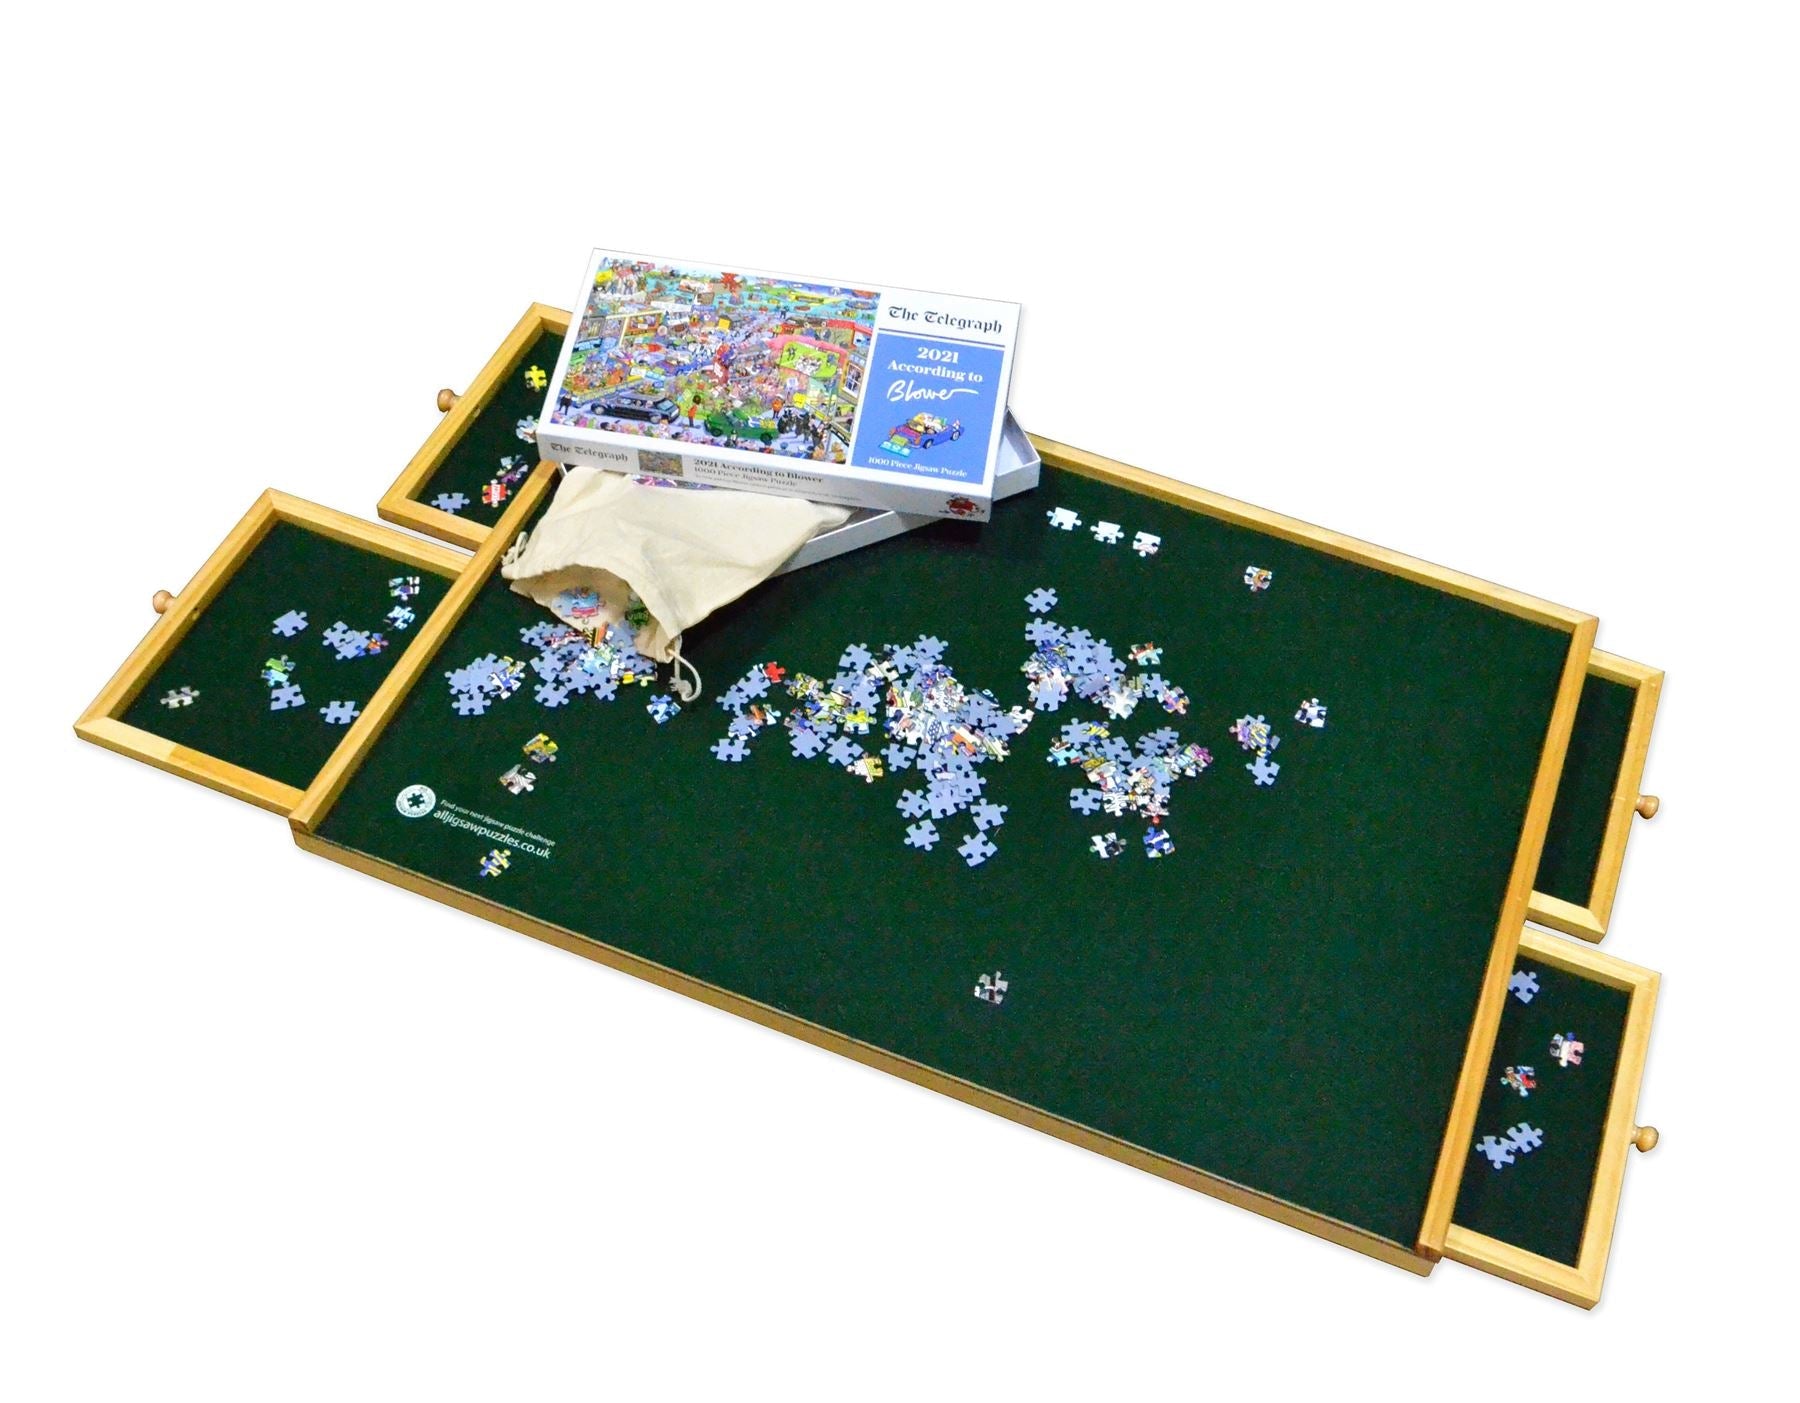 Wooden Jigsaw Puzzle Table - Premium – All Jigsaw Puzzles US